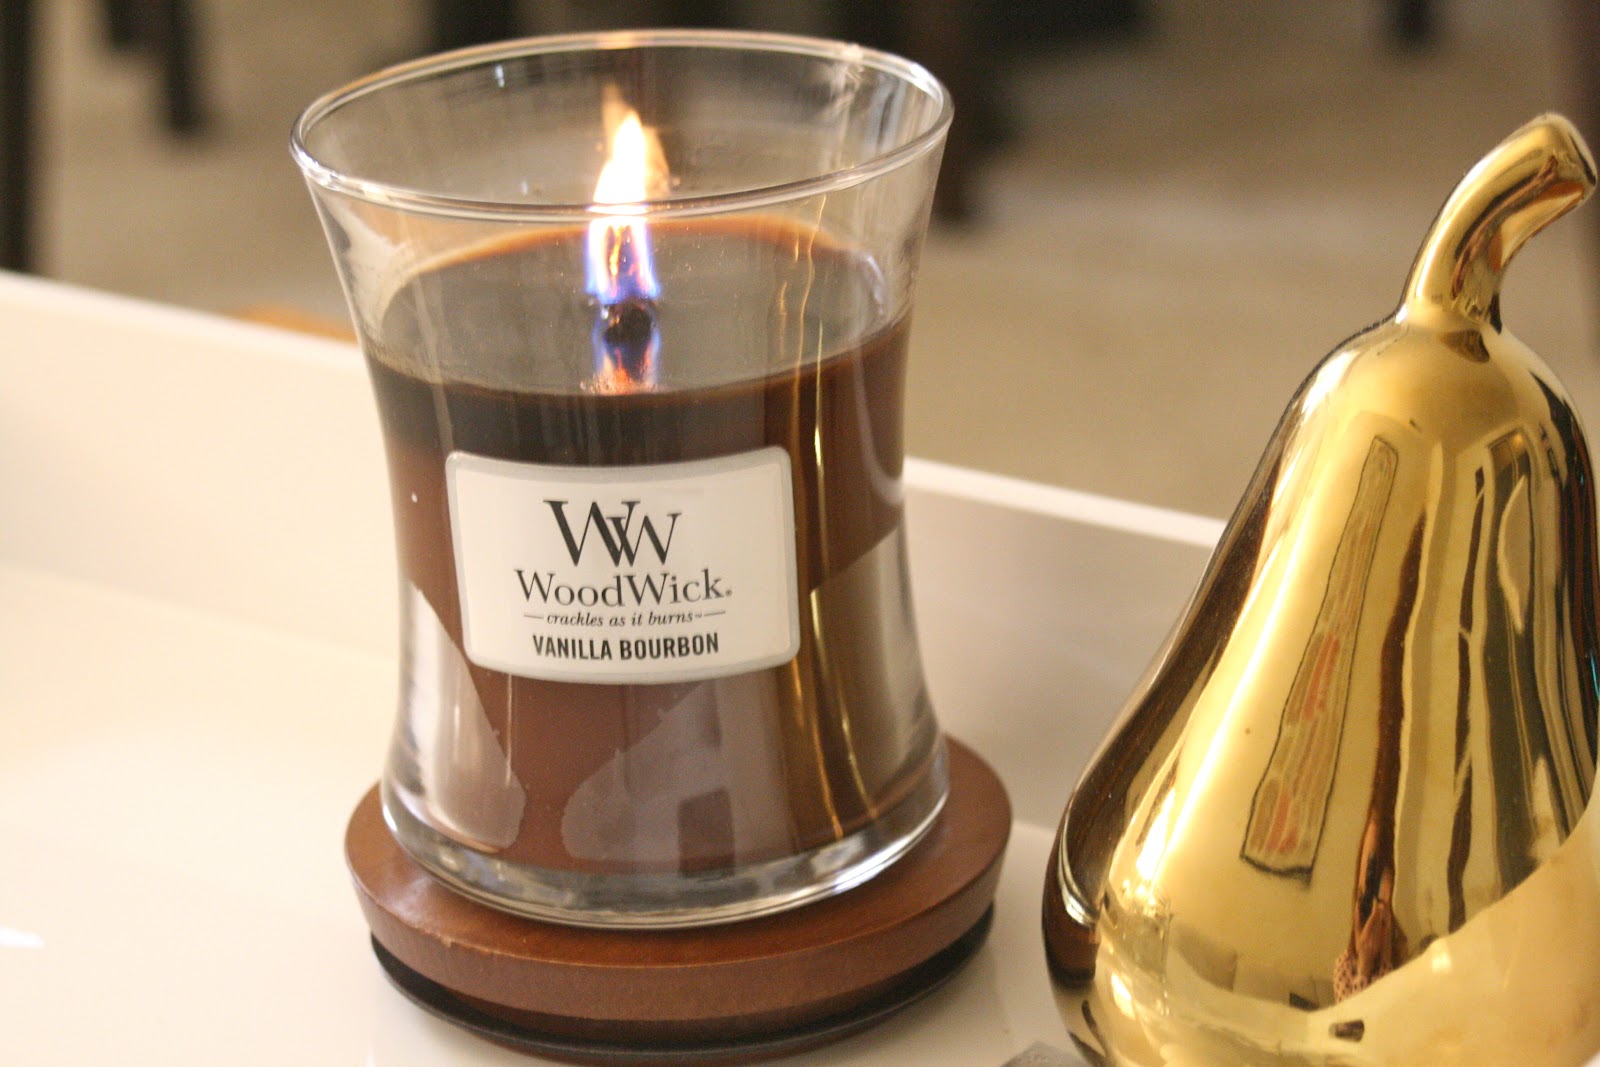 CupcakesOMG!: Friday Fun Find: WoodWick Candles